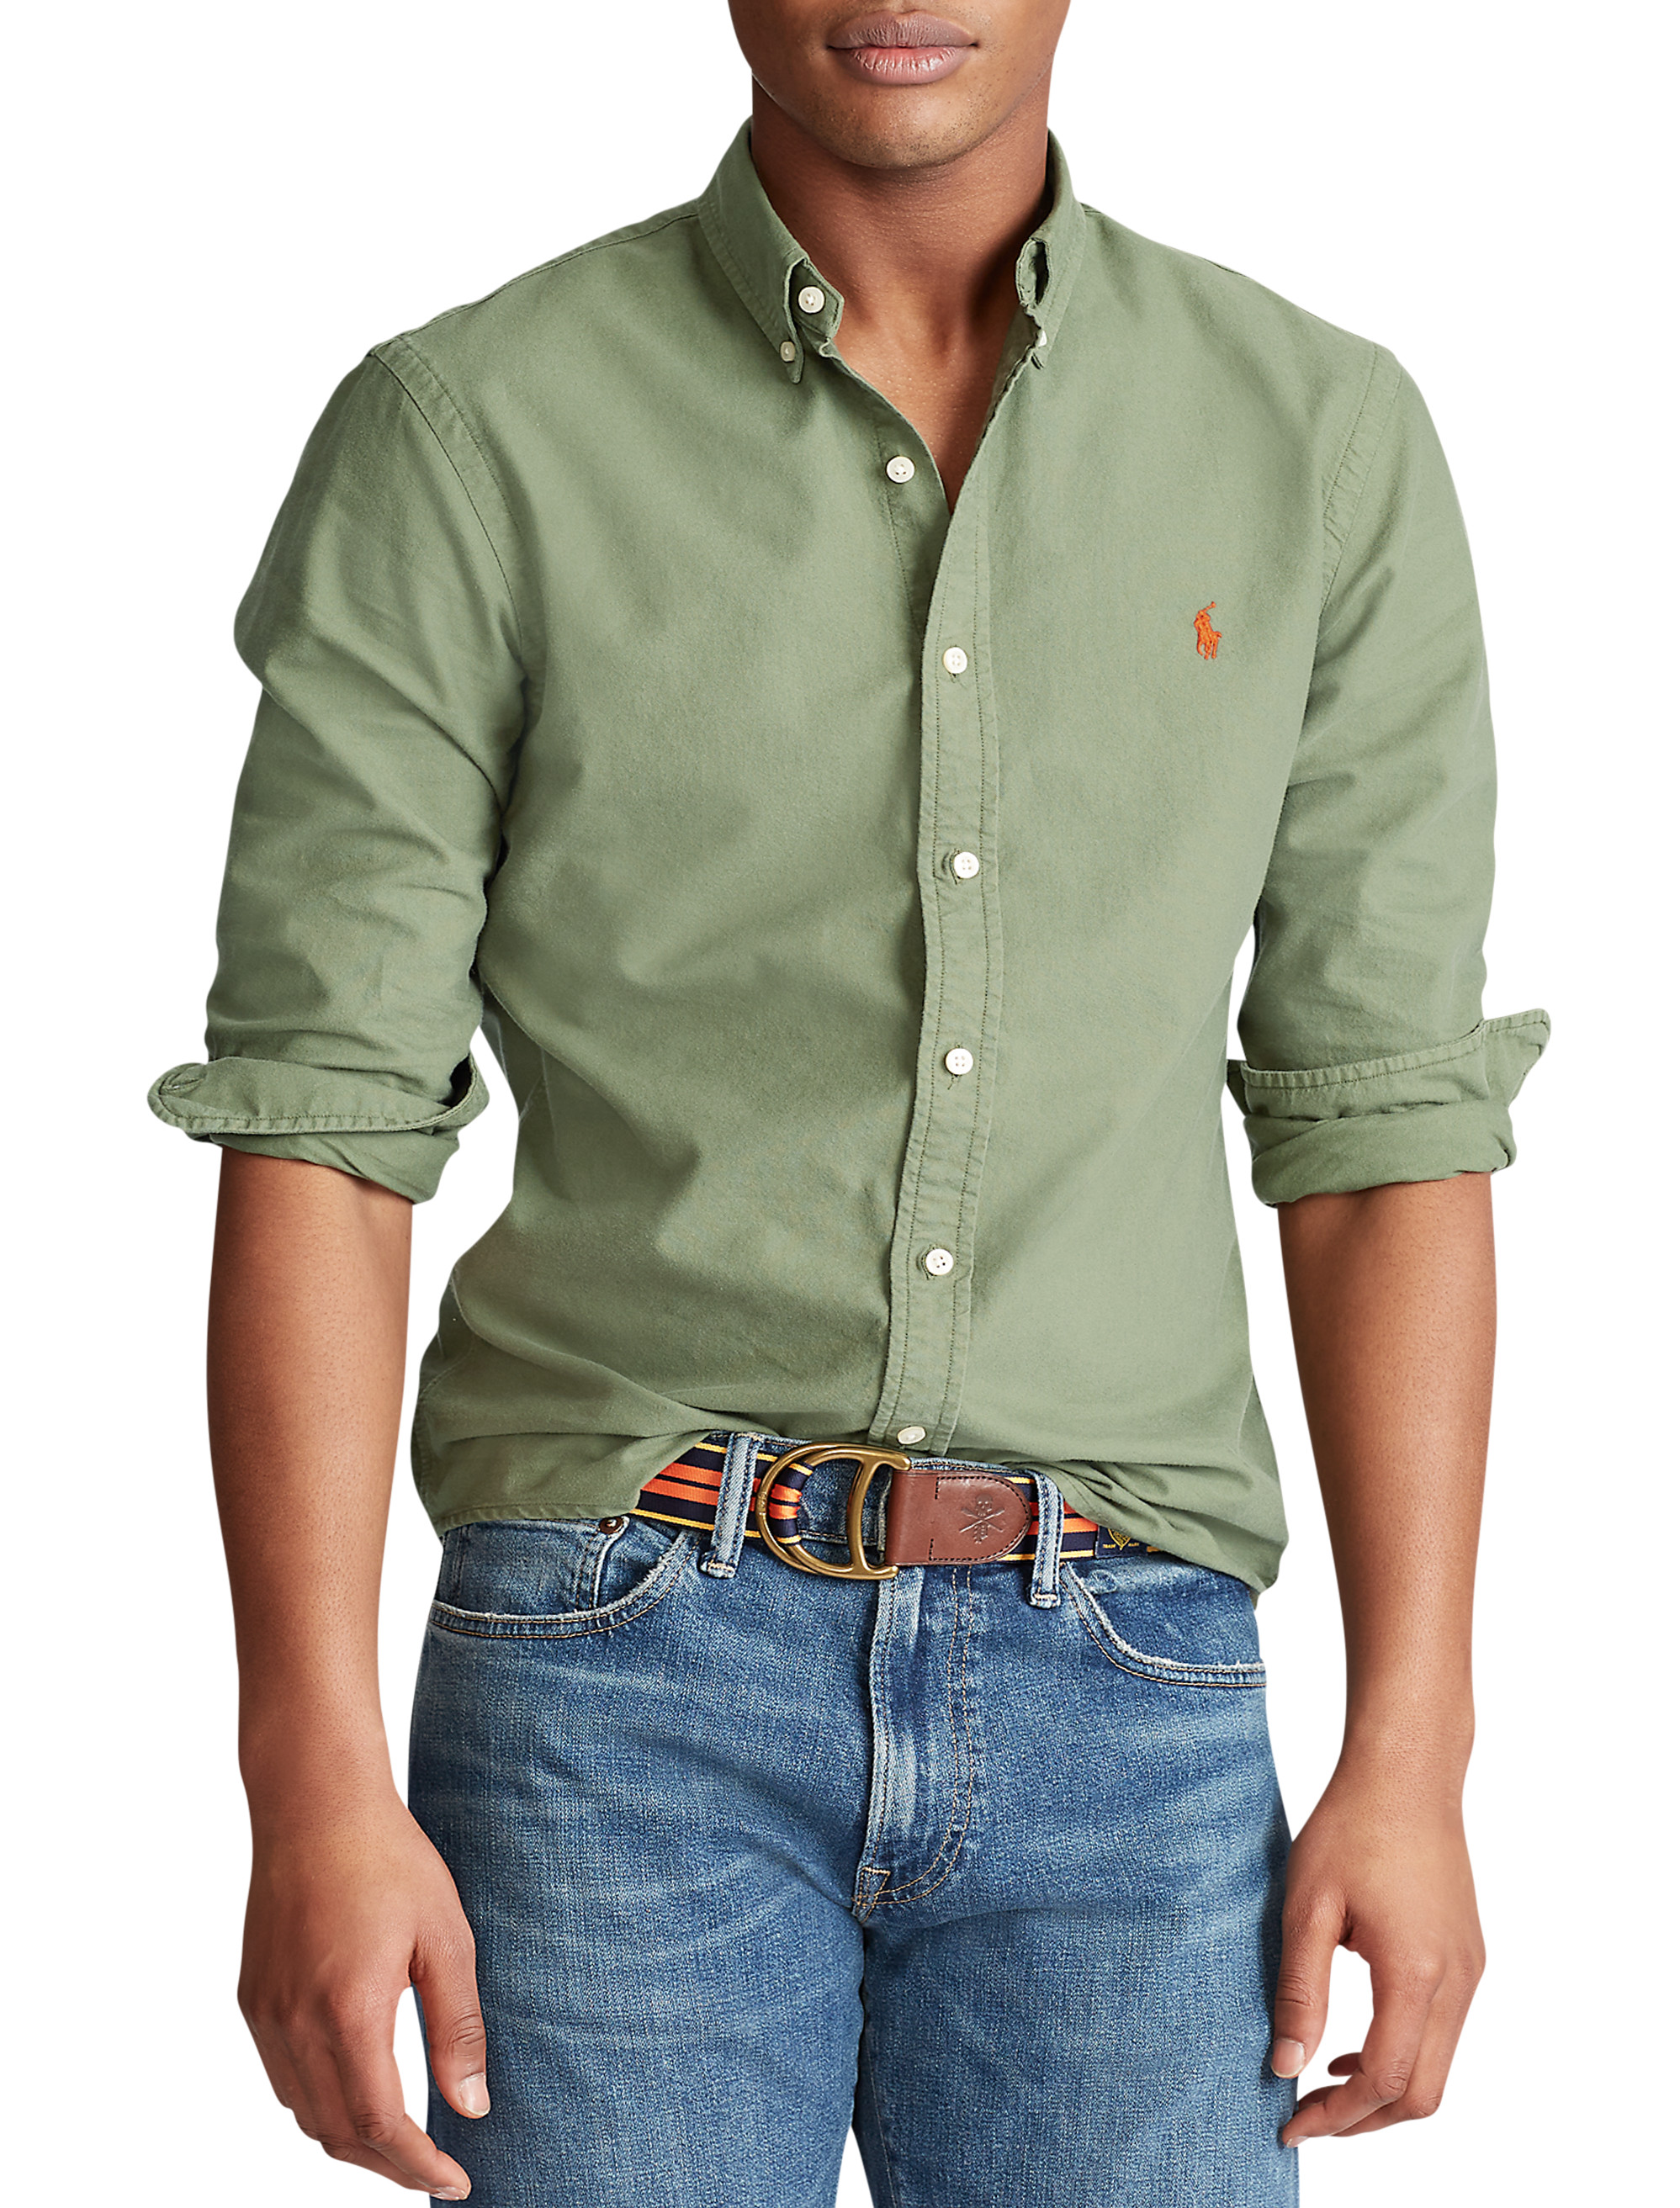 https://images.dxl.com/is/image/CasualMale/pD7736sage_green?$product$